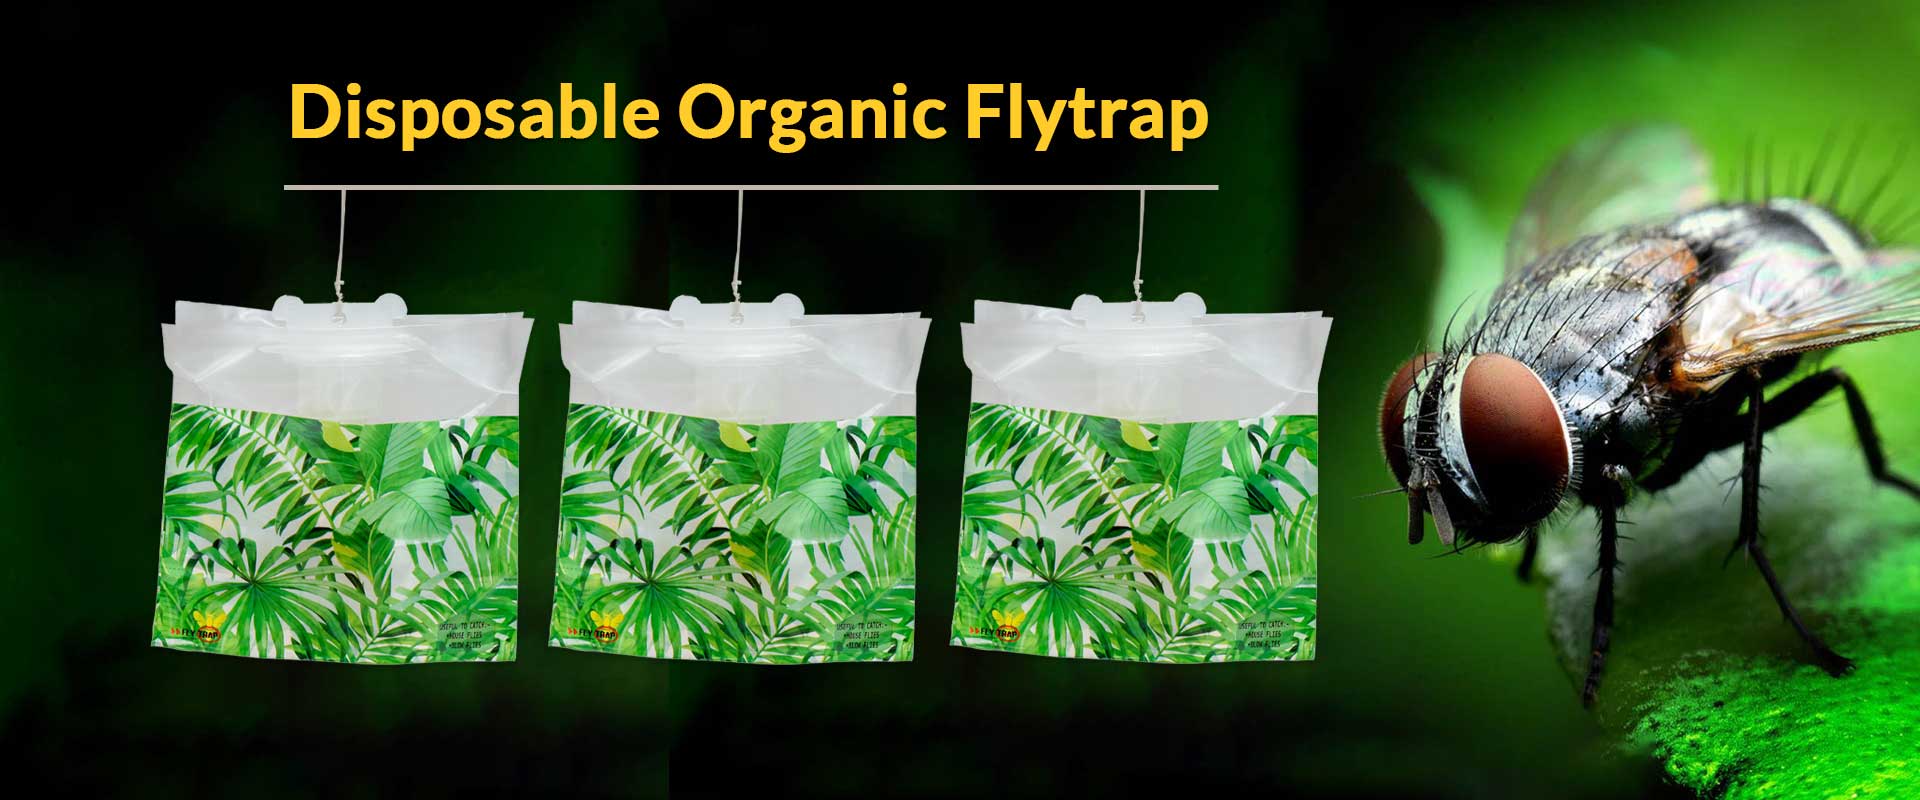 Disposable Organic Fly Trap Manufacturers in Delhi